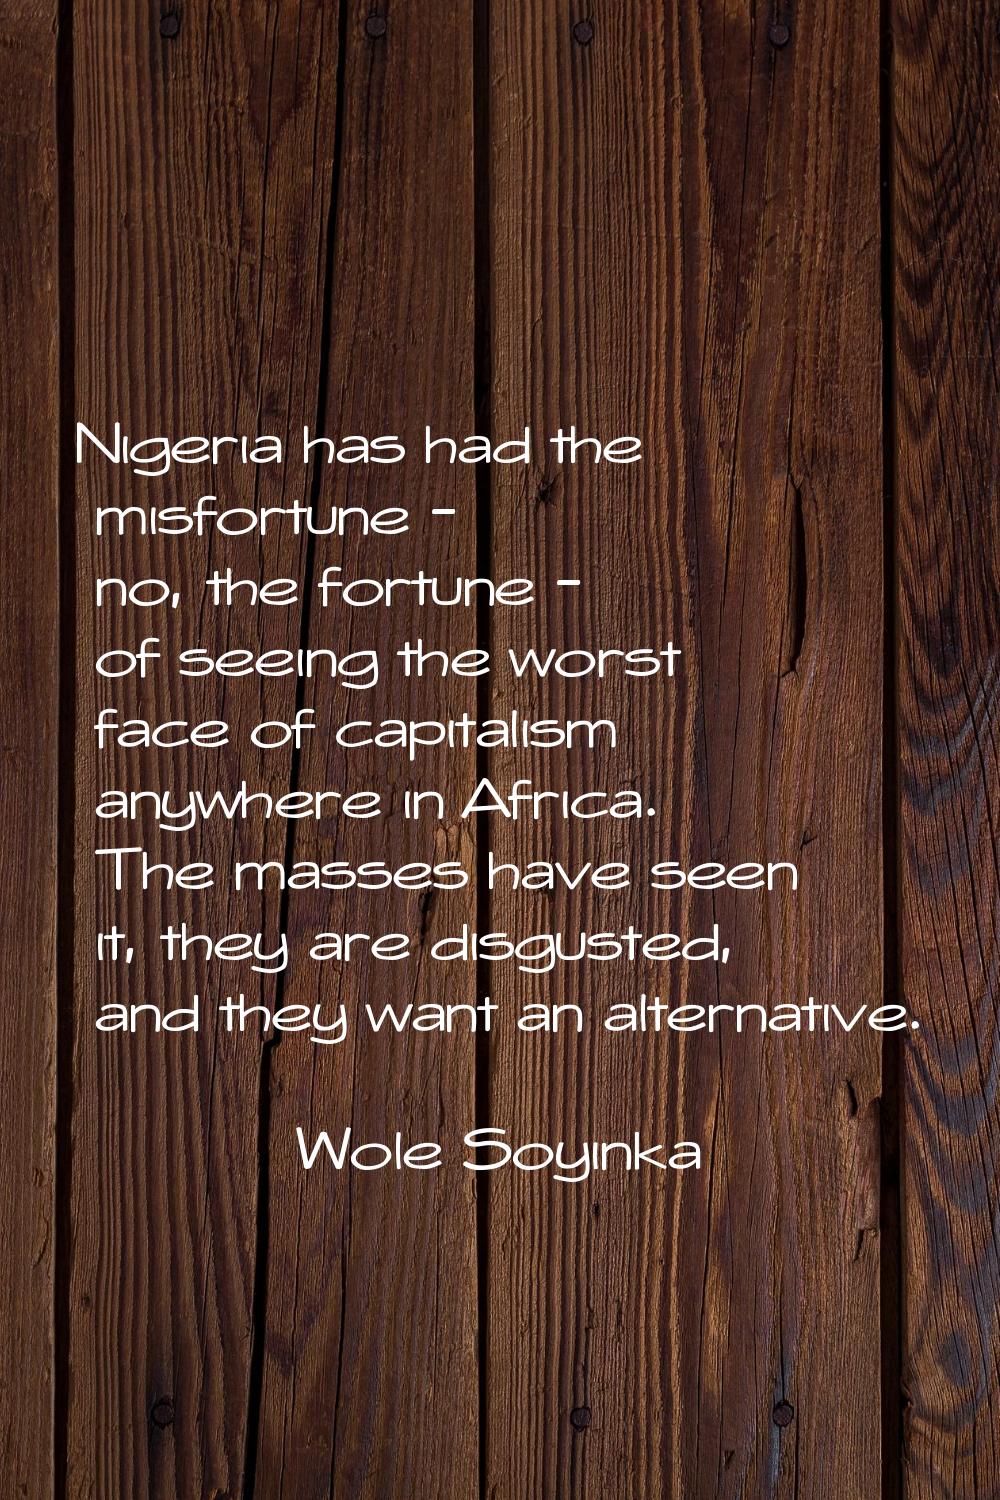 Nigeria has had the misfortune - no, the fortune - of seeing the worst face of capitalism anywhere 